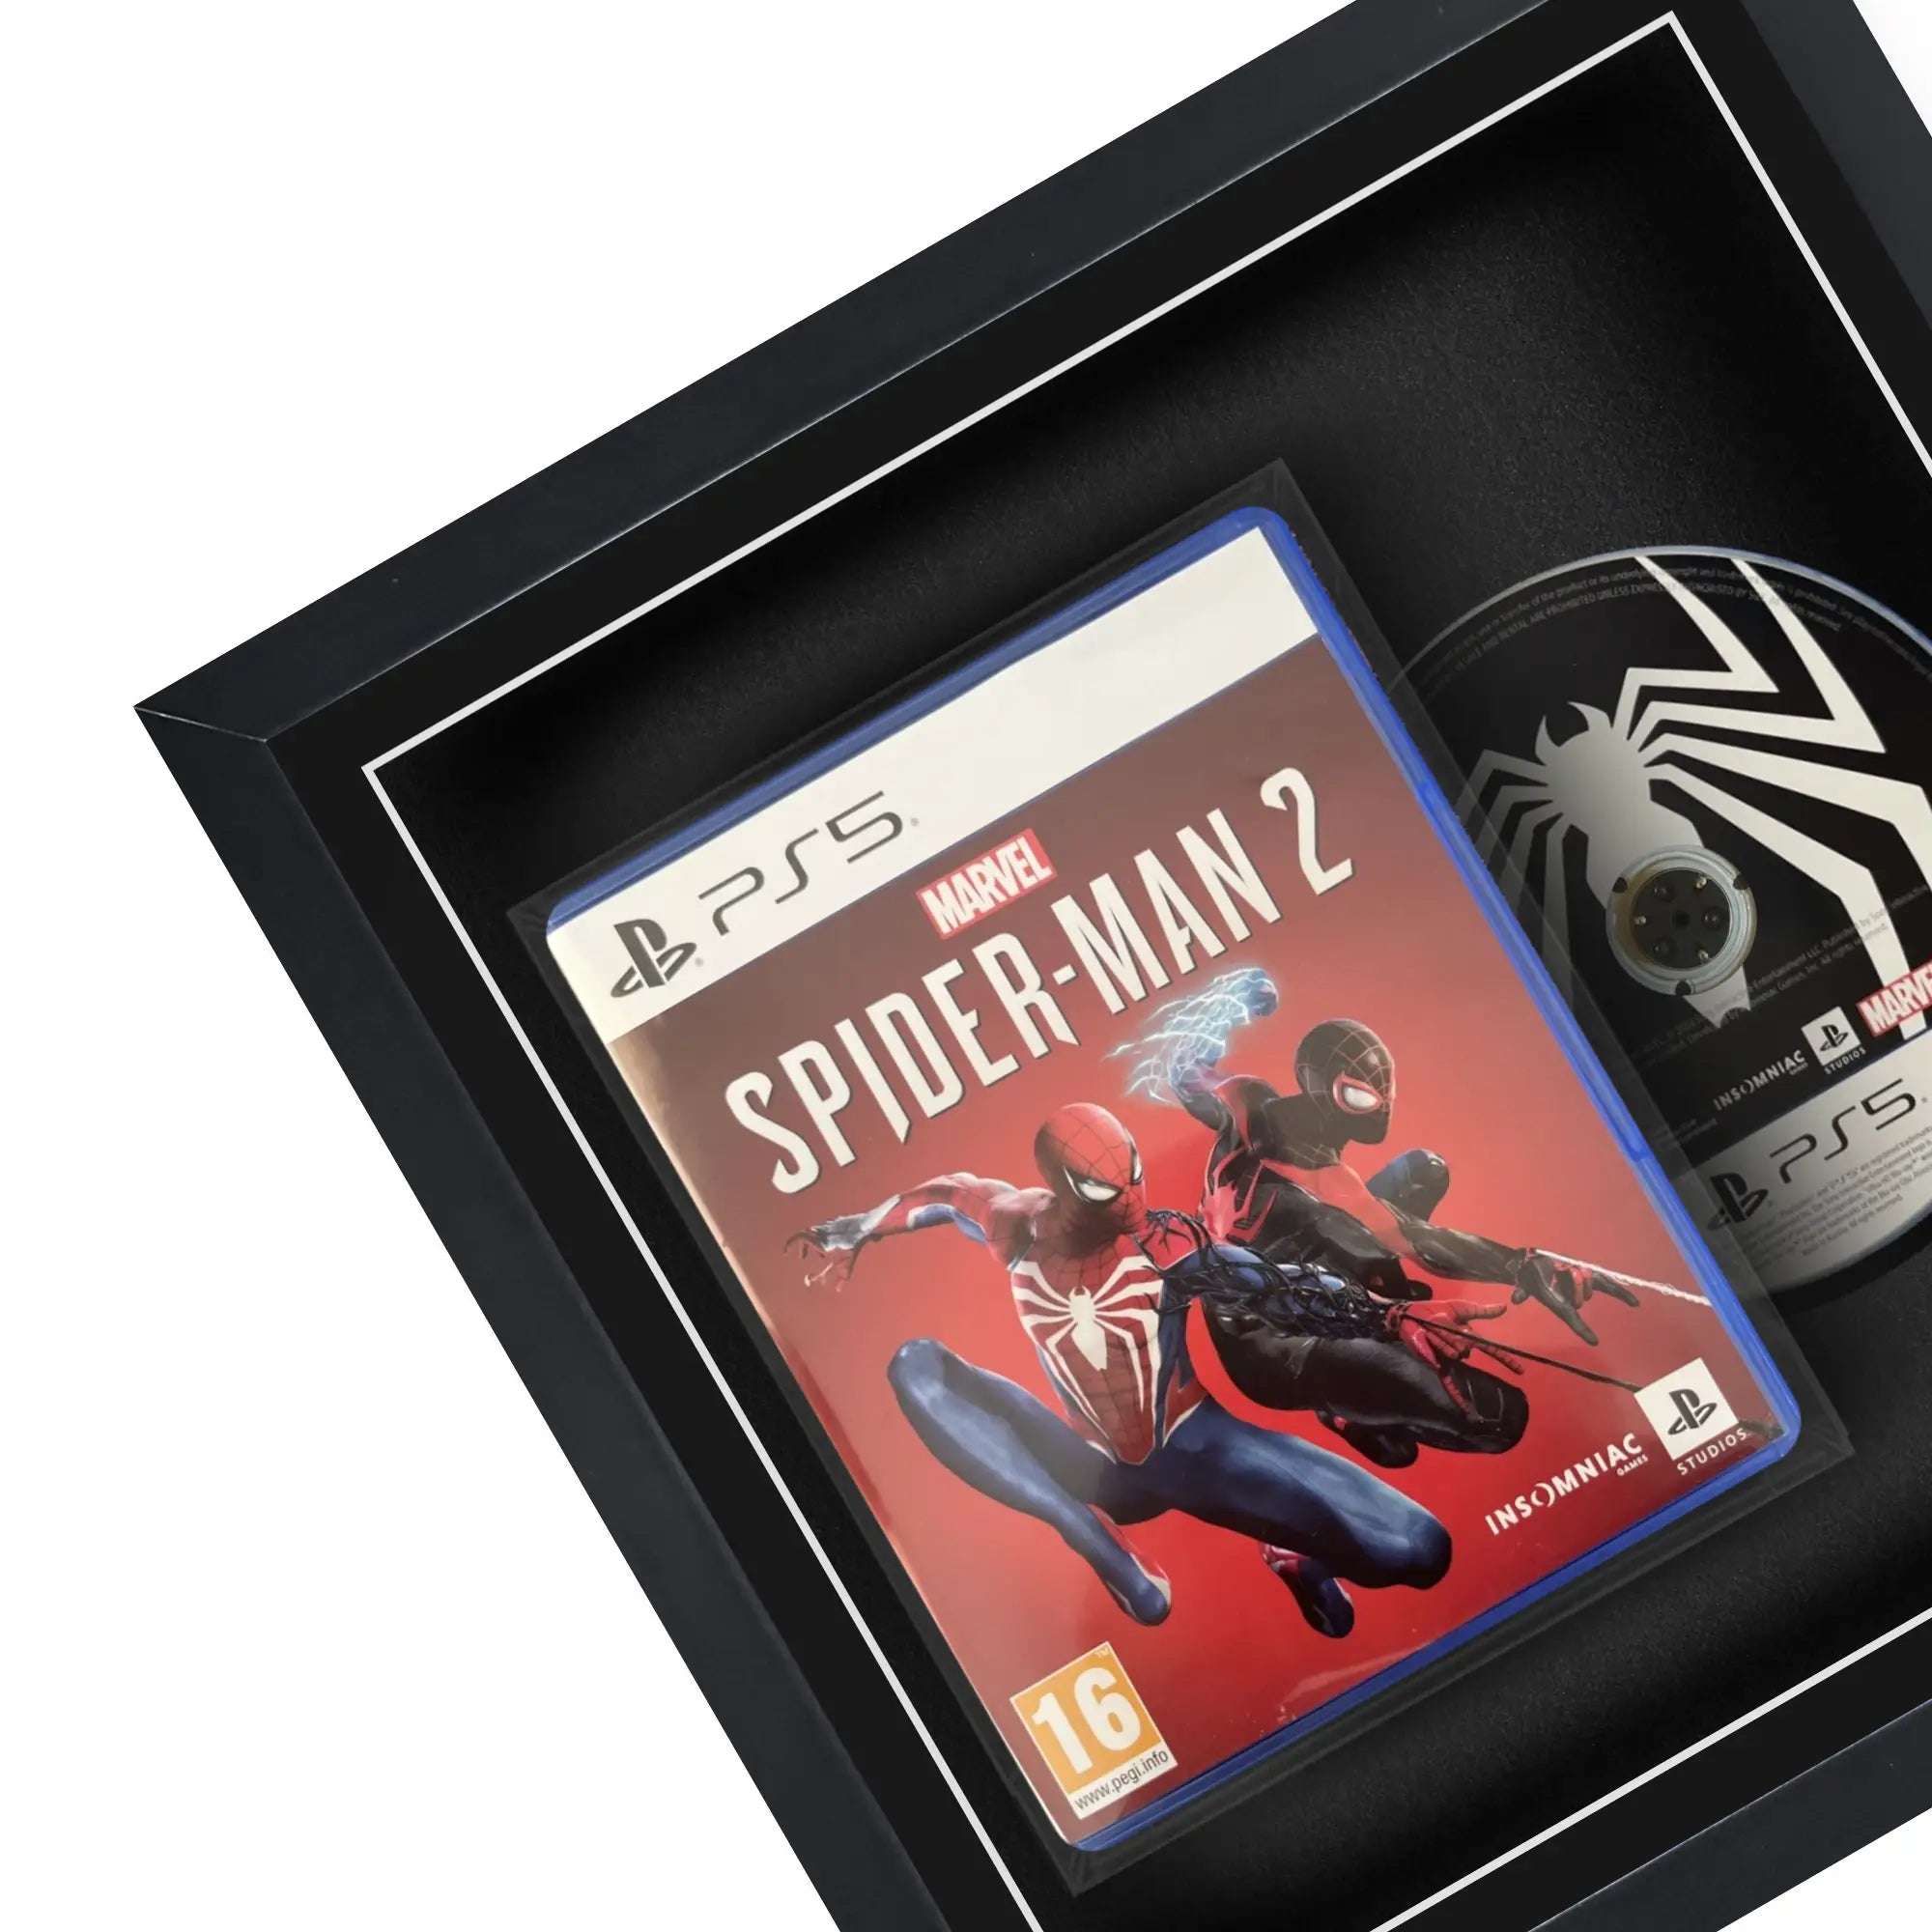 Frame your own PlayStation 5 game to be displayed within this square frame, the perfect way to showcase your game